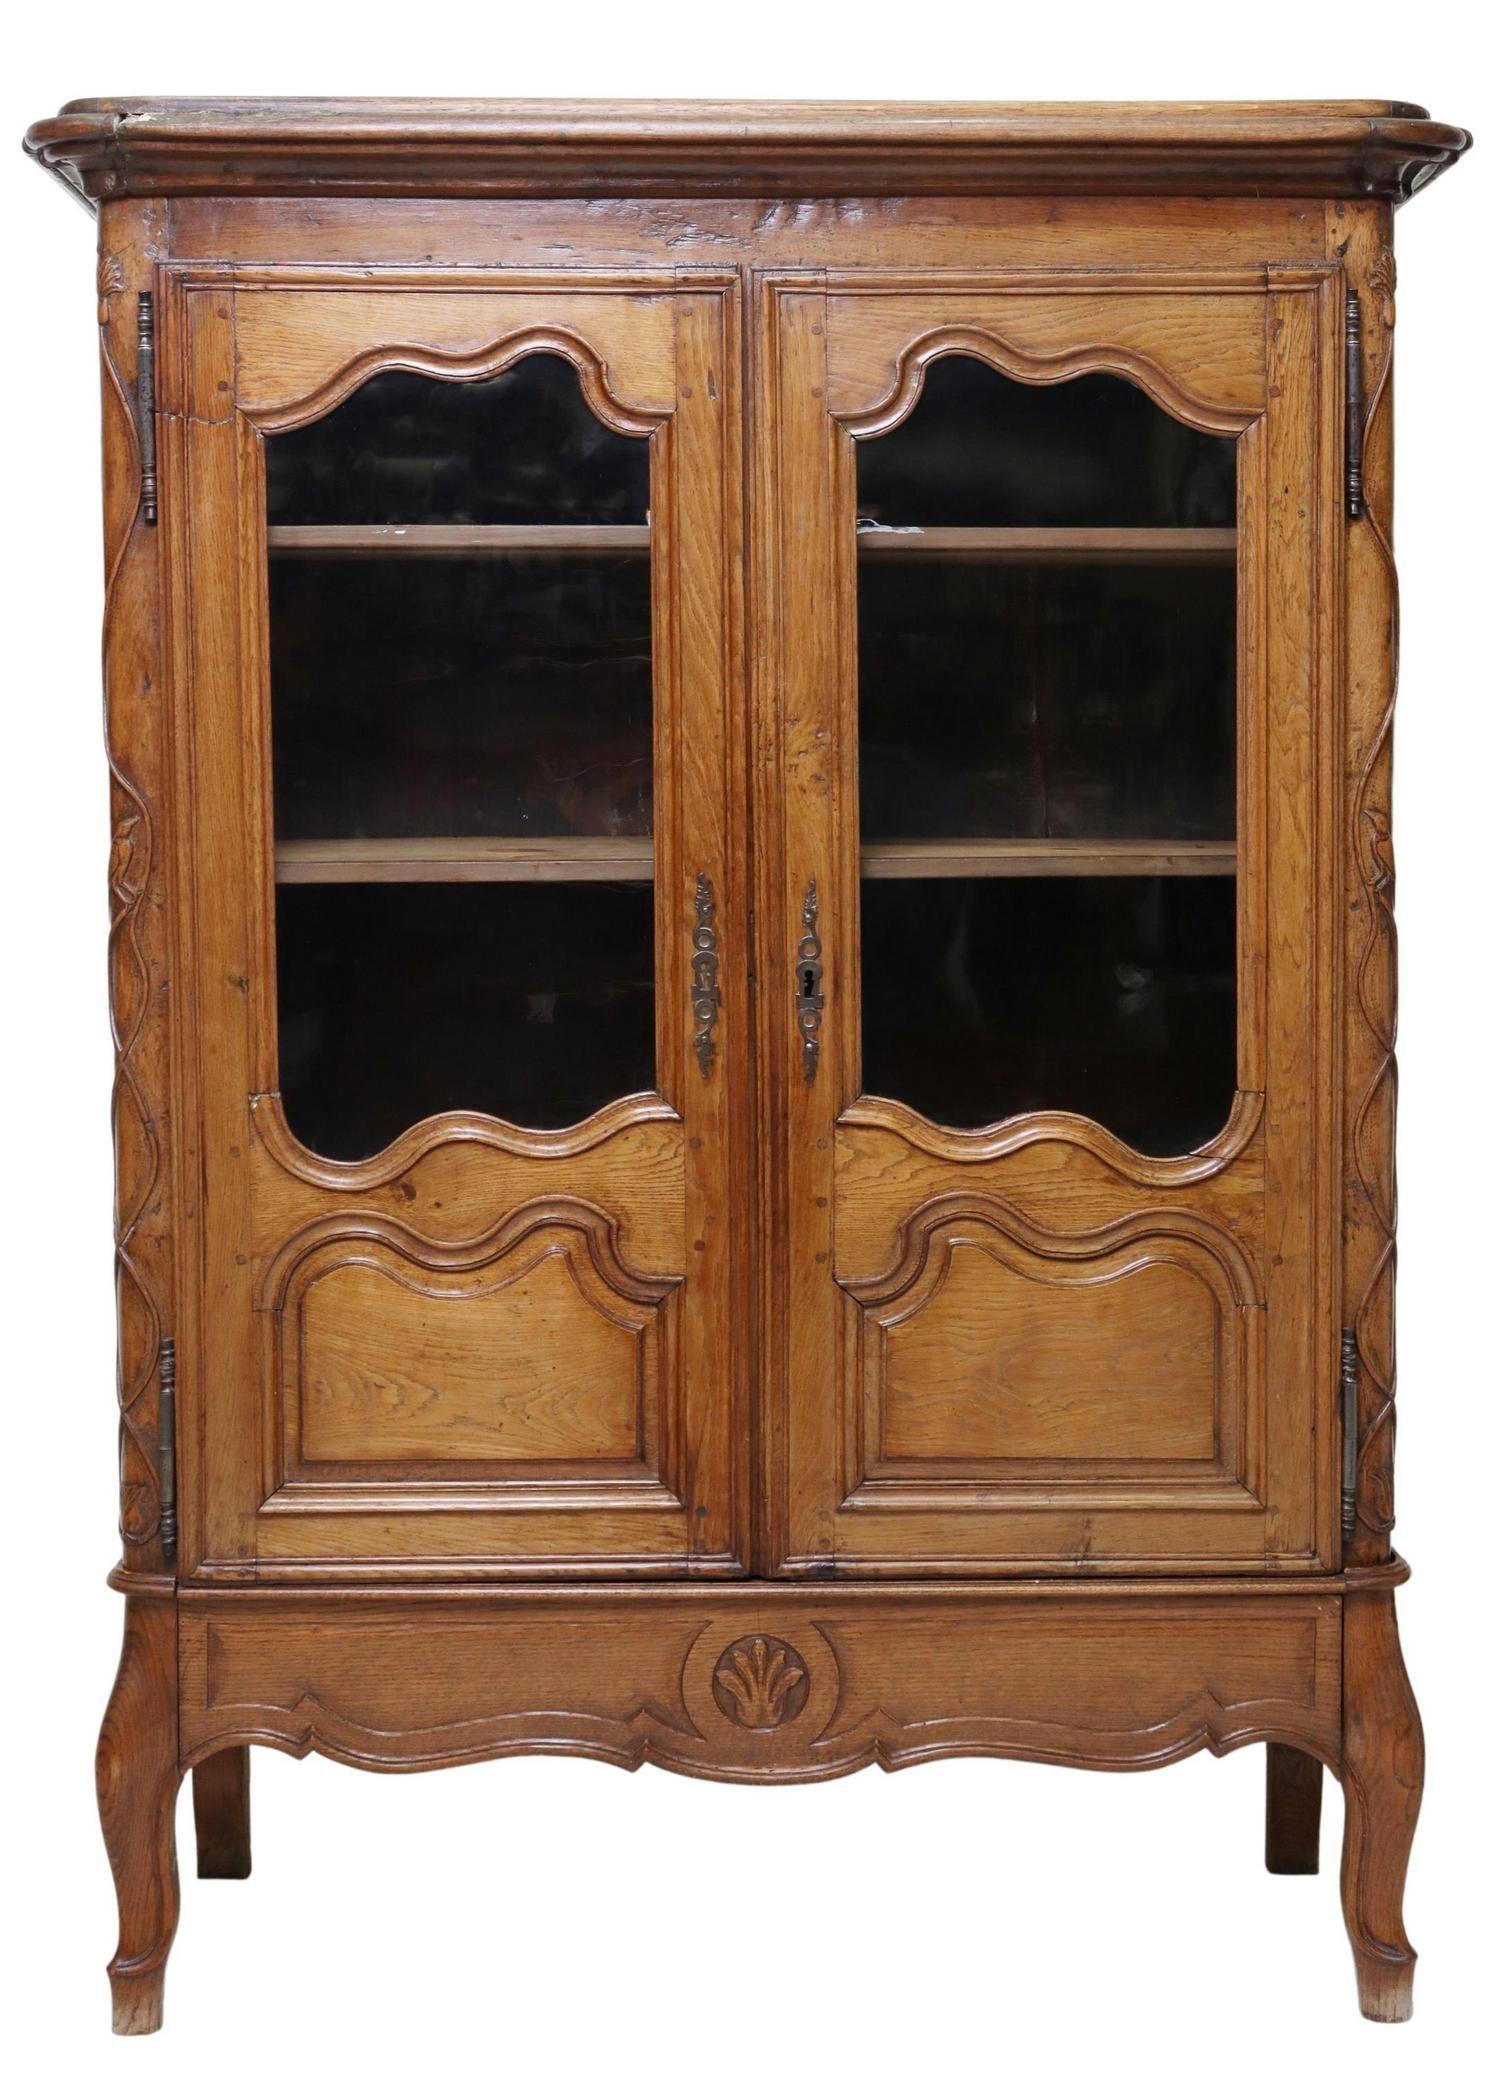 Louis XV style oak cabinet, 18th c/19thc. This cabinet's base was built and added later. The stepped protruding cornice over two partial glazed doors flanked by carved vines and birds, the lower part with a single drawer, rising on cabriolet